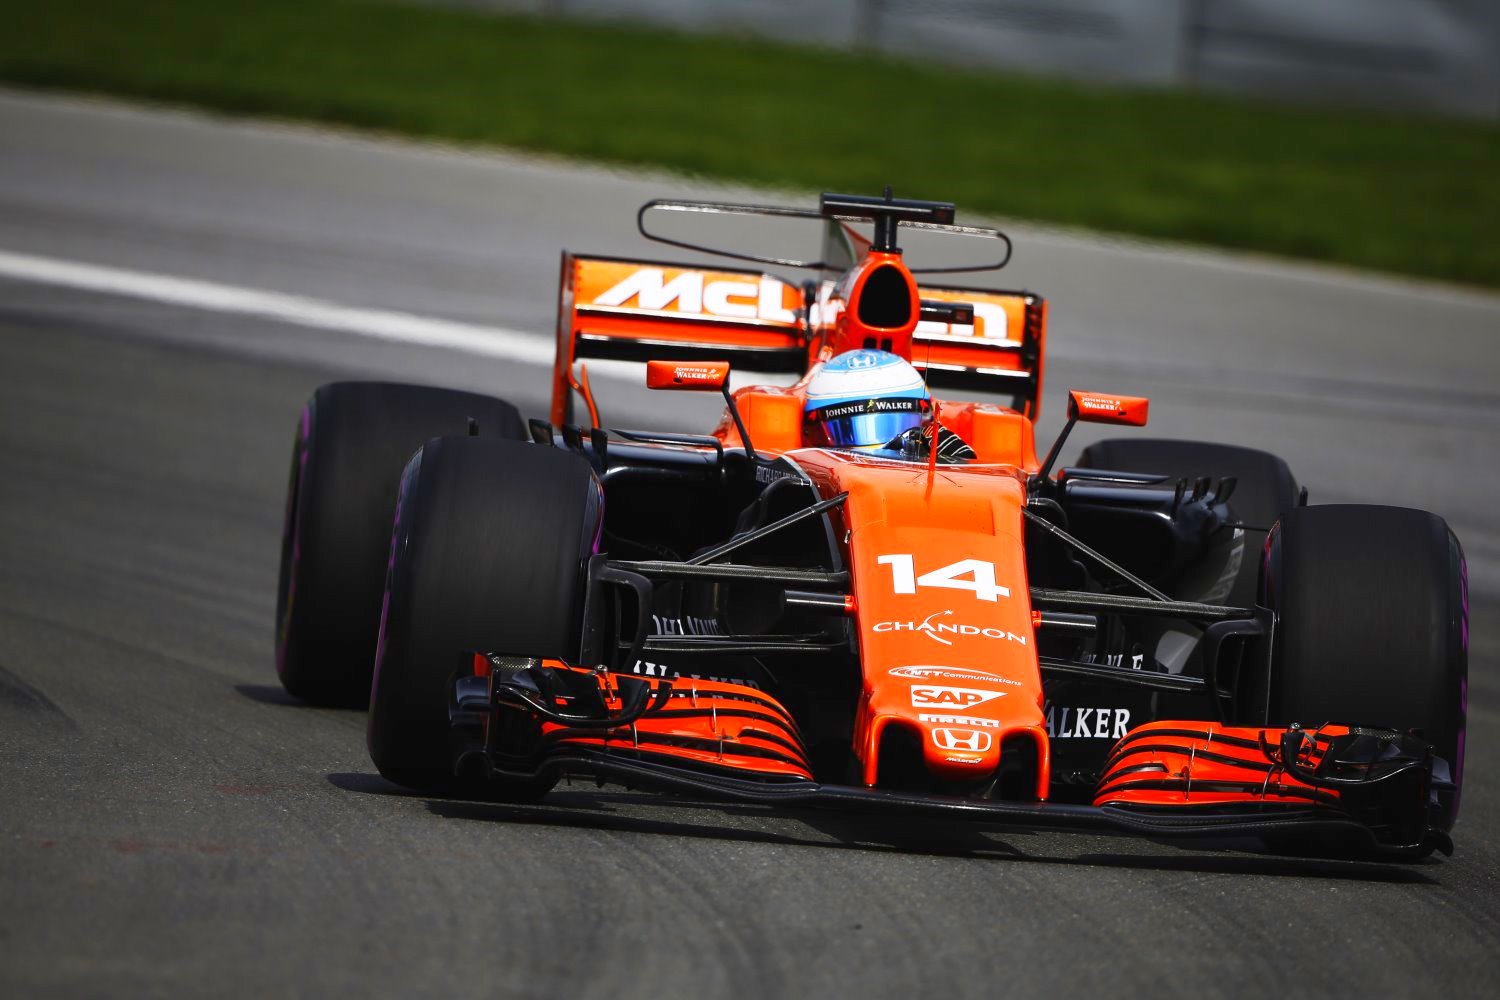 Alonso says the McLaren is fast if not for Honda